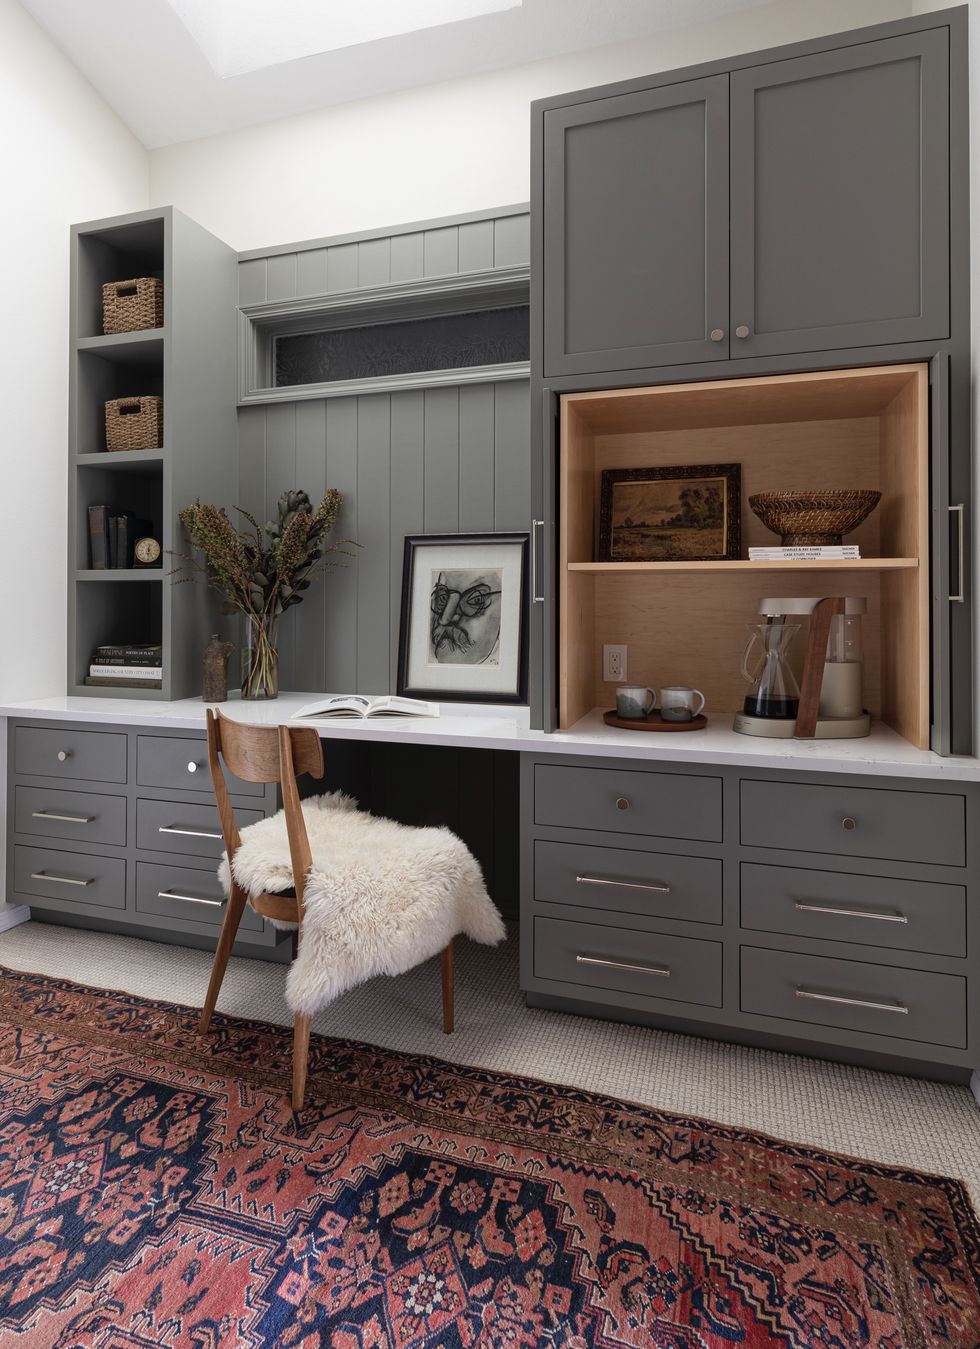 10 Practical Home Office Decorating Ideas to Amaze You